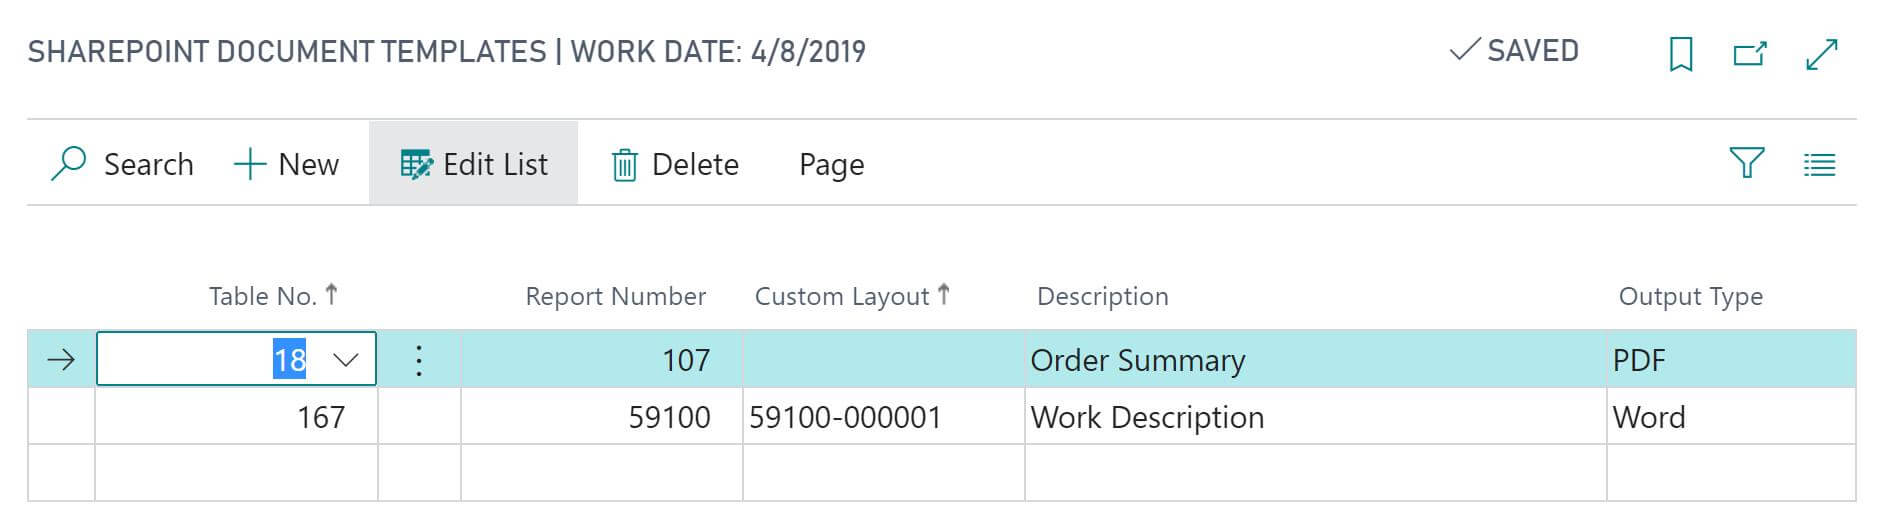 document templates in sharepoint connector